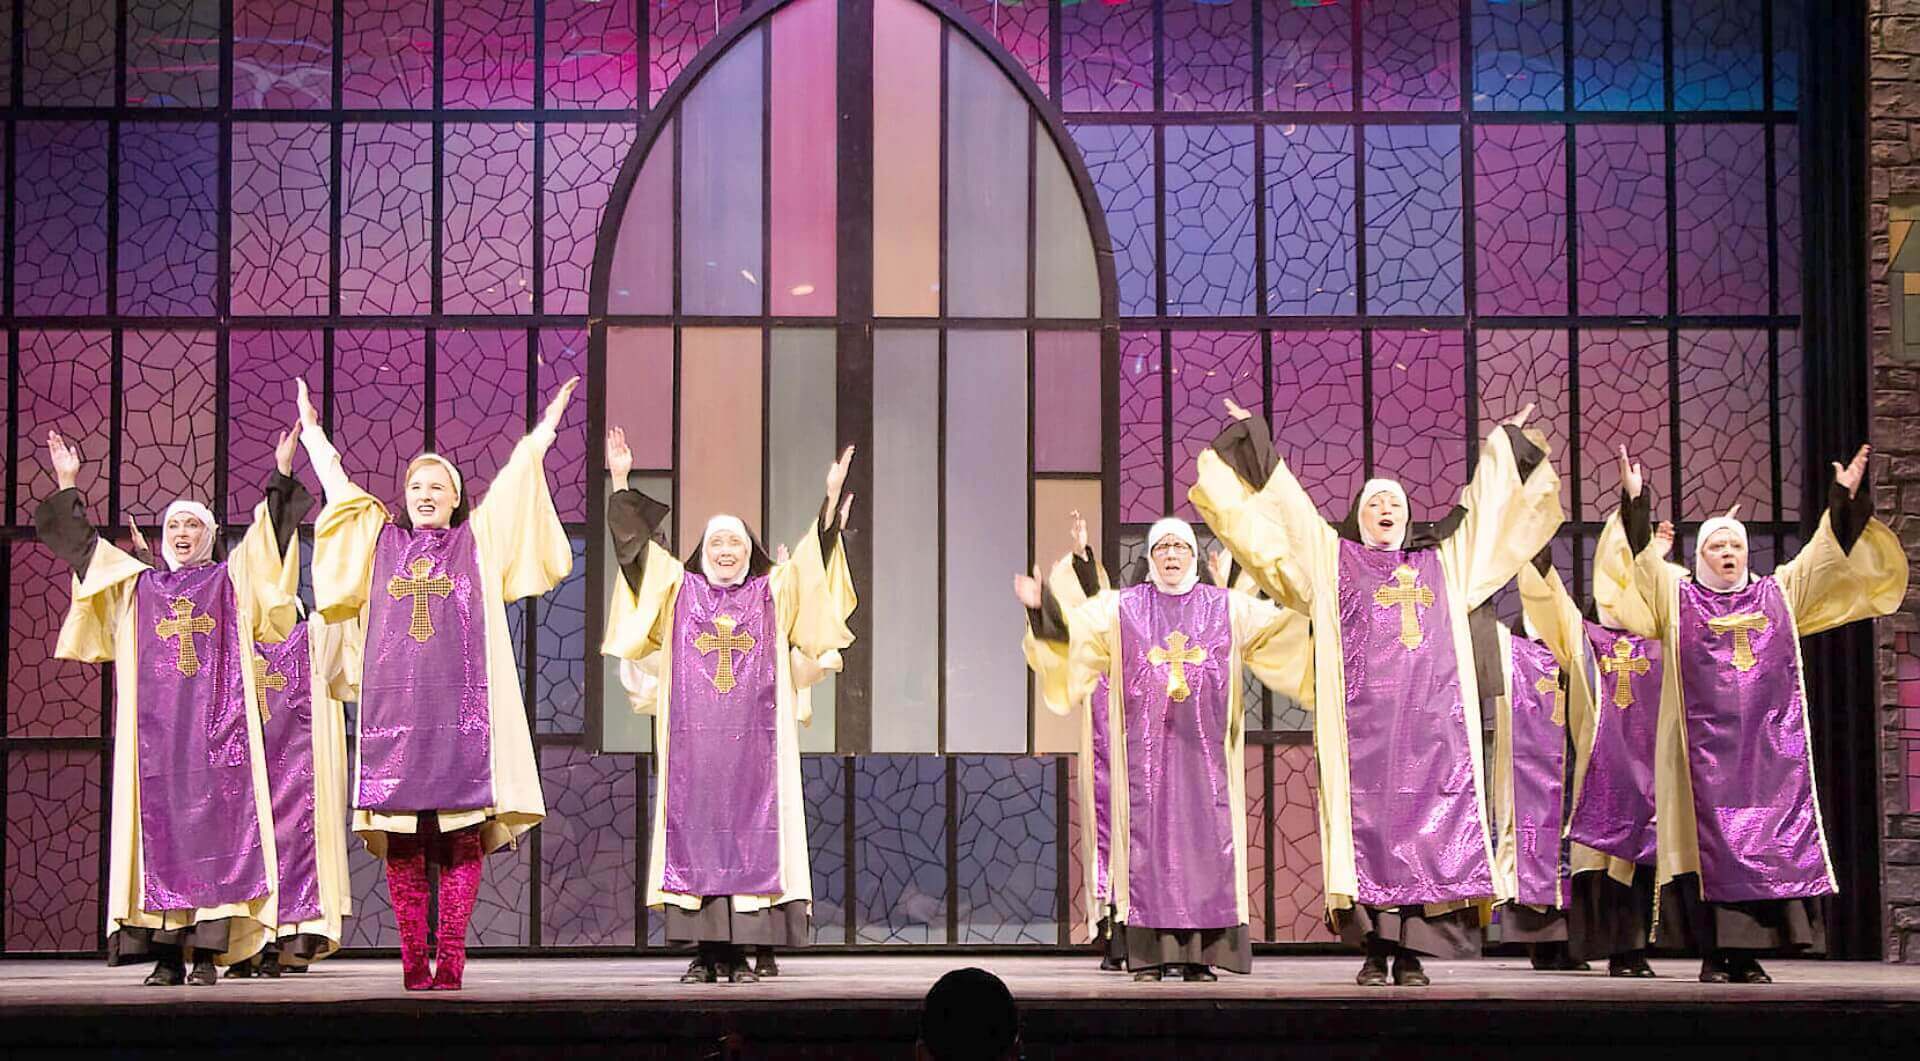 Nuns Sparkle Finale Habit Costume - Sister Act Costume Rental pictures - Stagecraft Theatrical